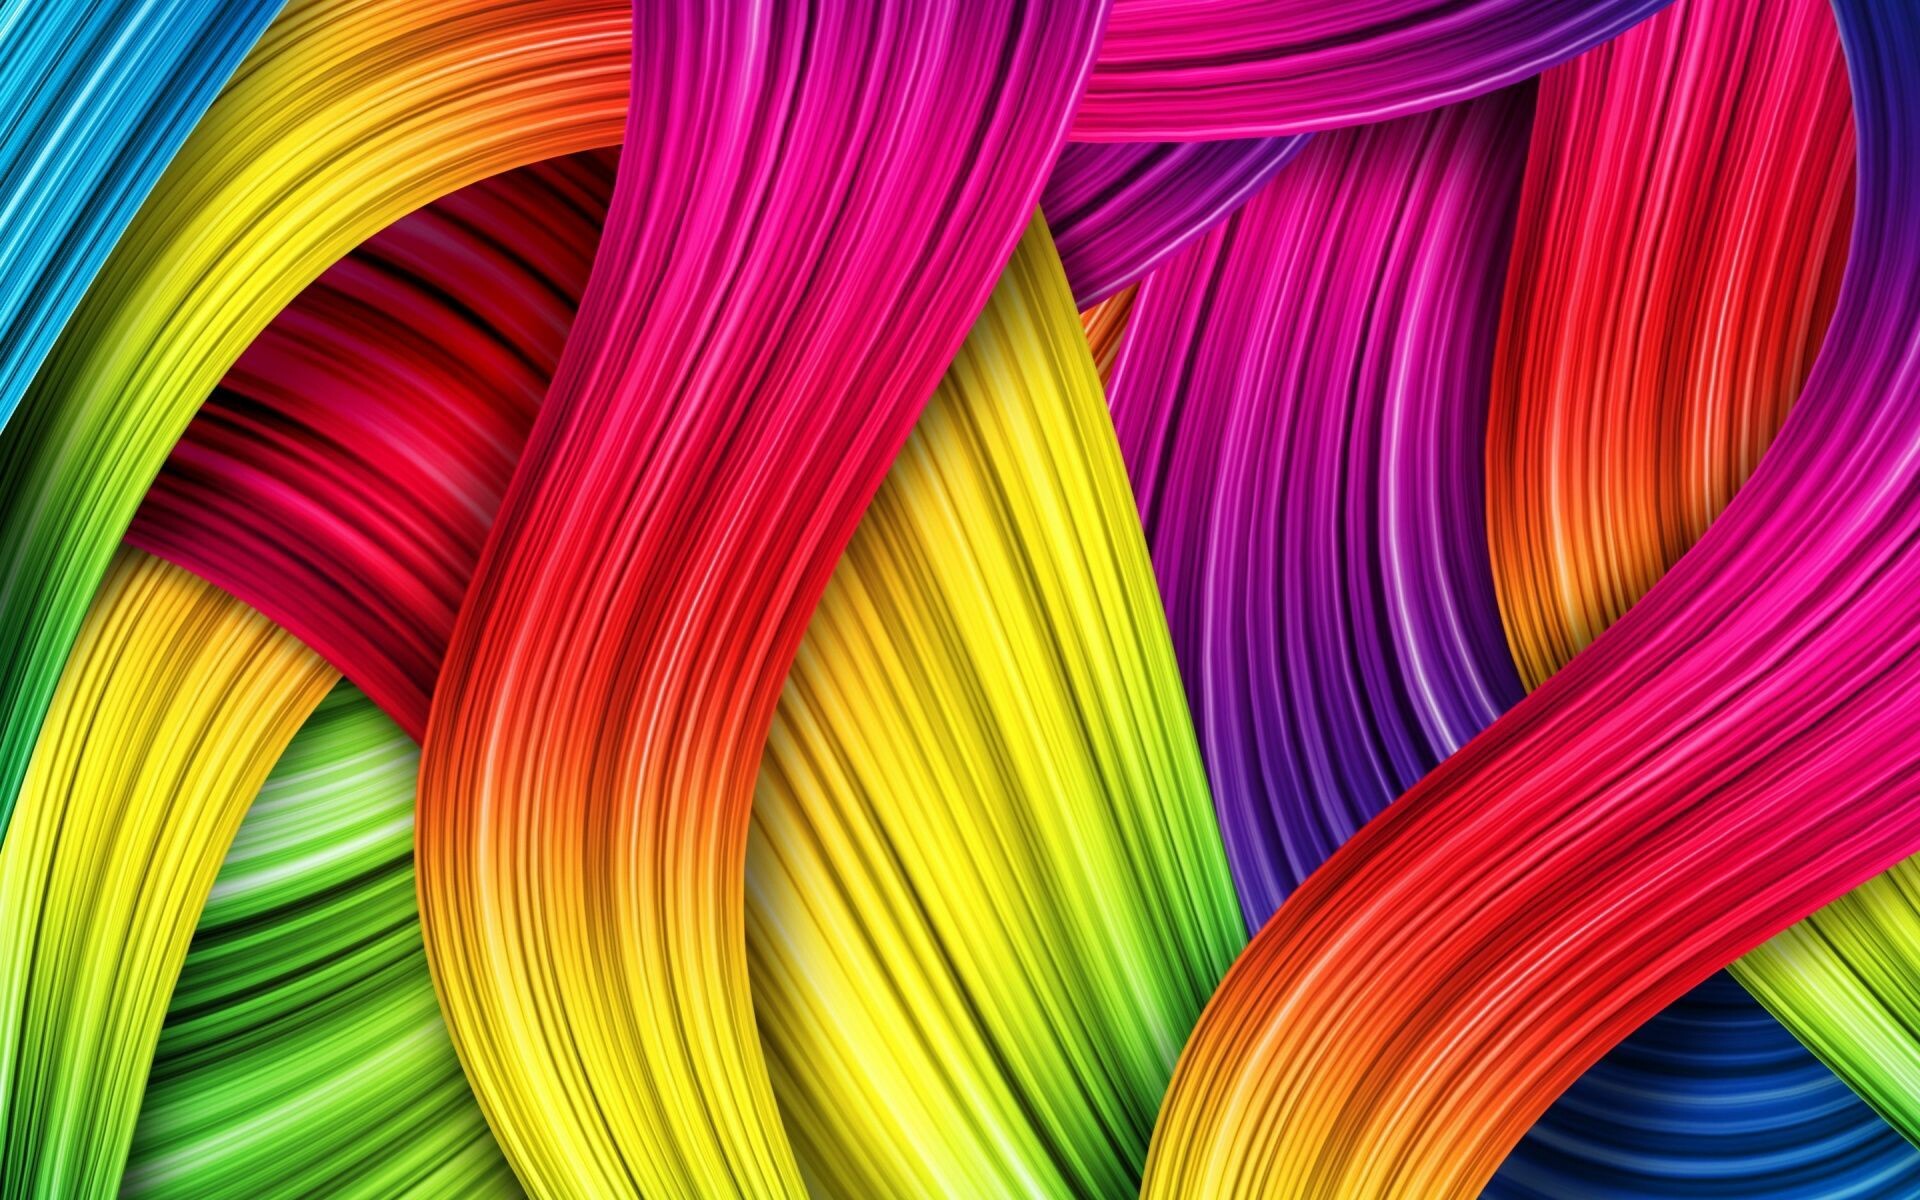 47+ Colorful Abstract Wallpapers: HD, 4K, 5K for PC and Mobile | Download  free images for iPhone, Android